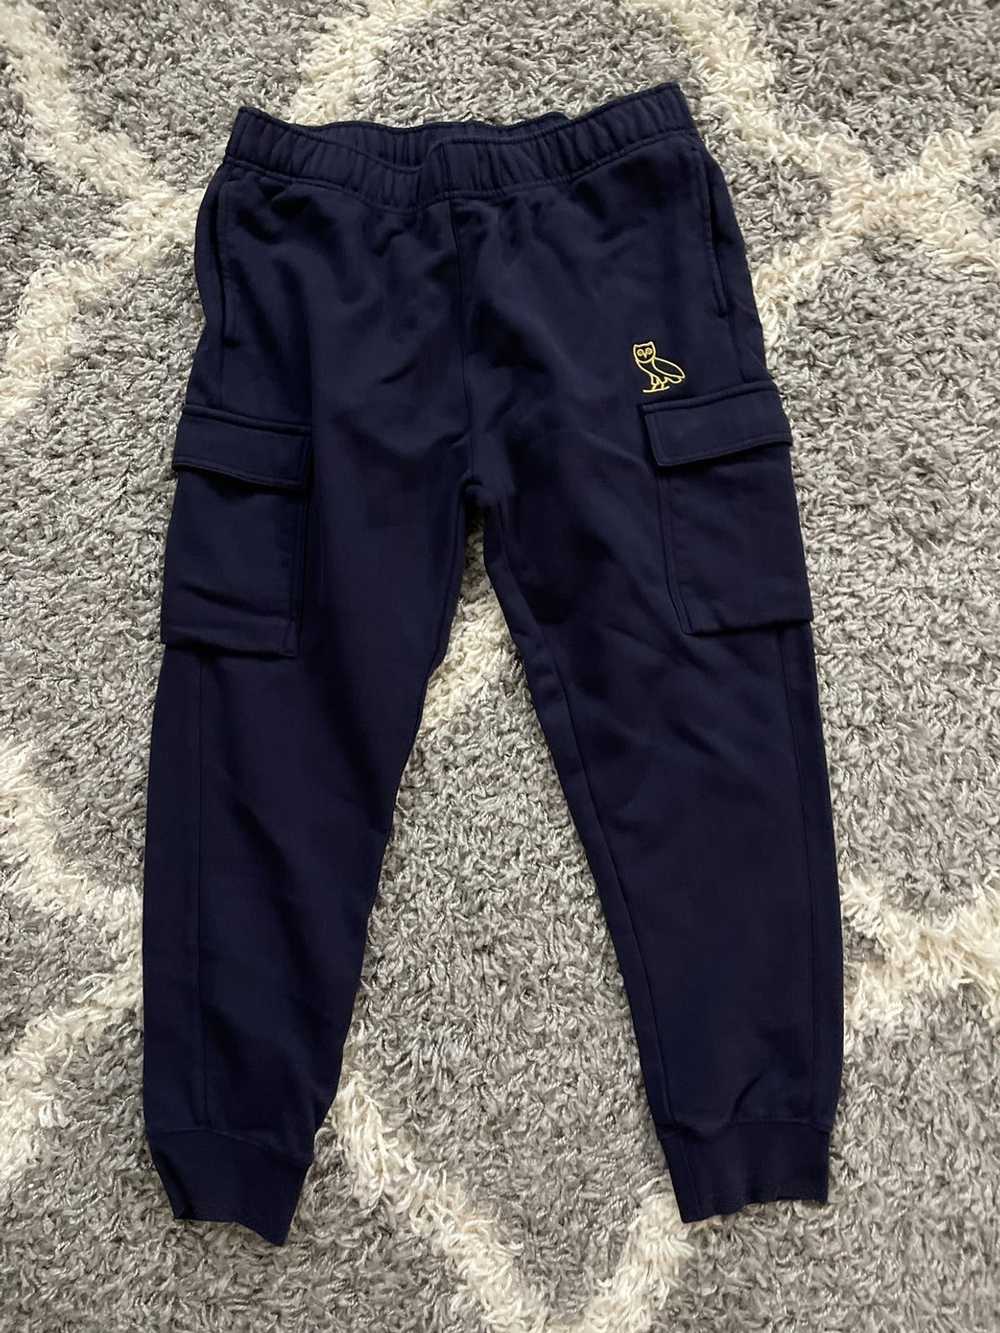 Octobers Very Own OVO Octobers Very Own Navy Jogg… - image 2